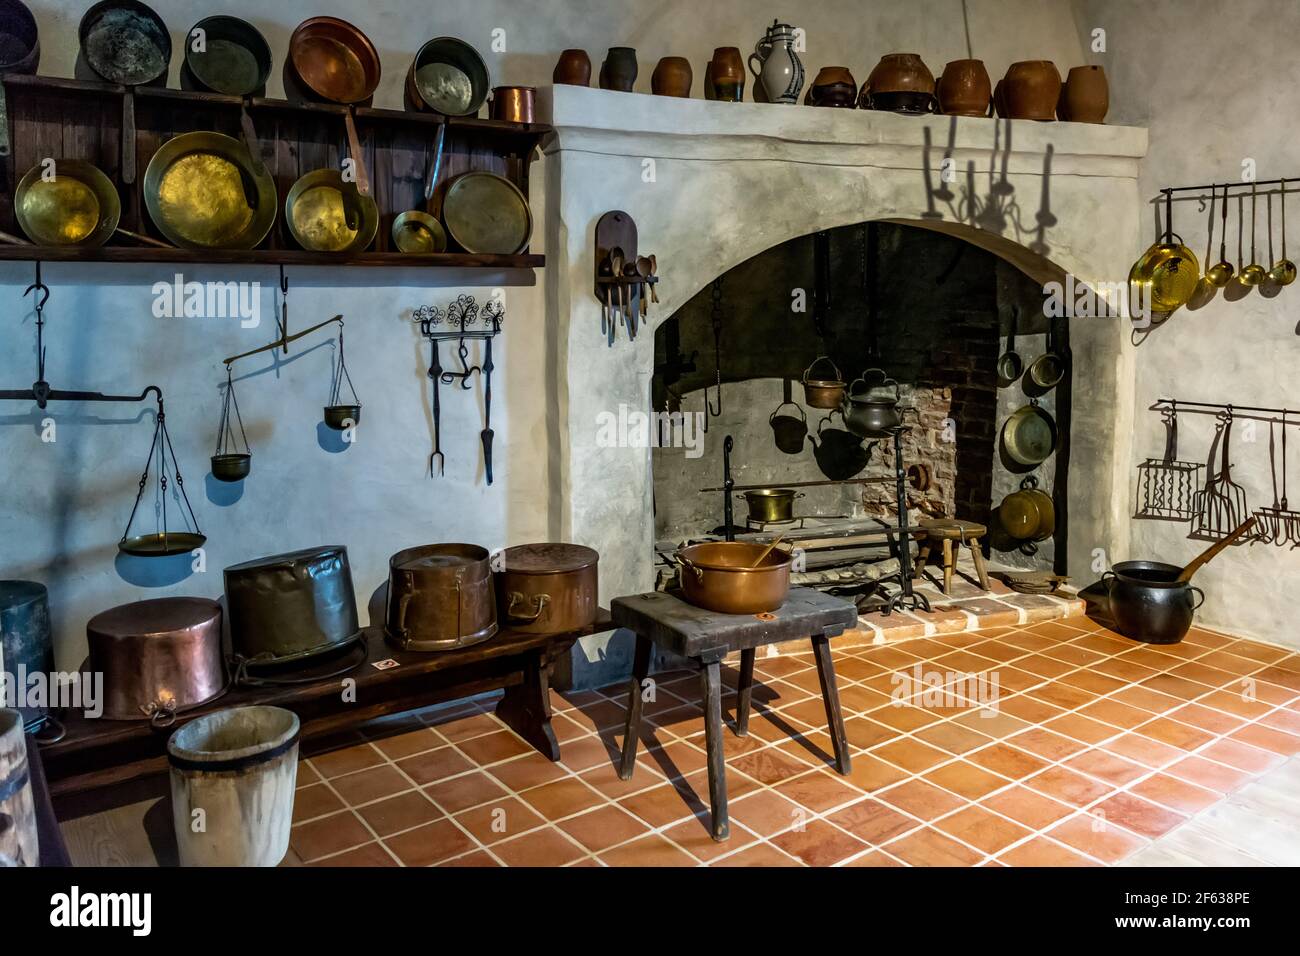 Interiors of Bauska Castle - kitchen with 16th-17th century brass, iron and wooden kitchen equipment Stock Photo